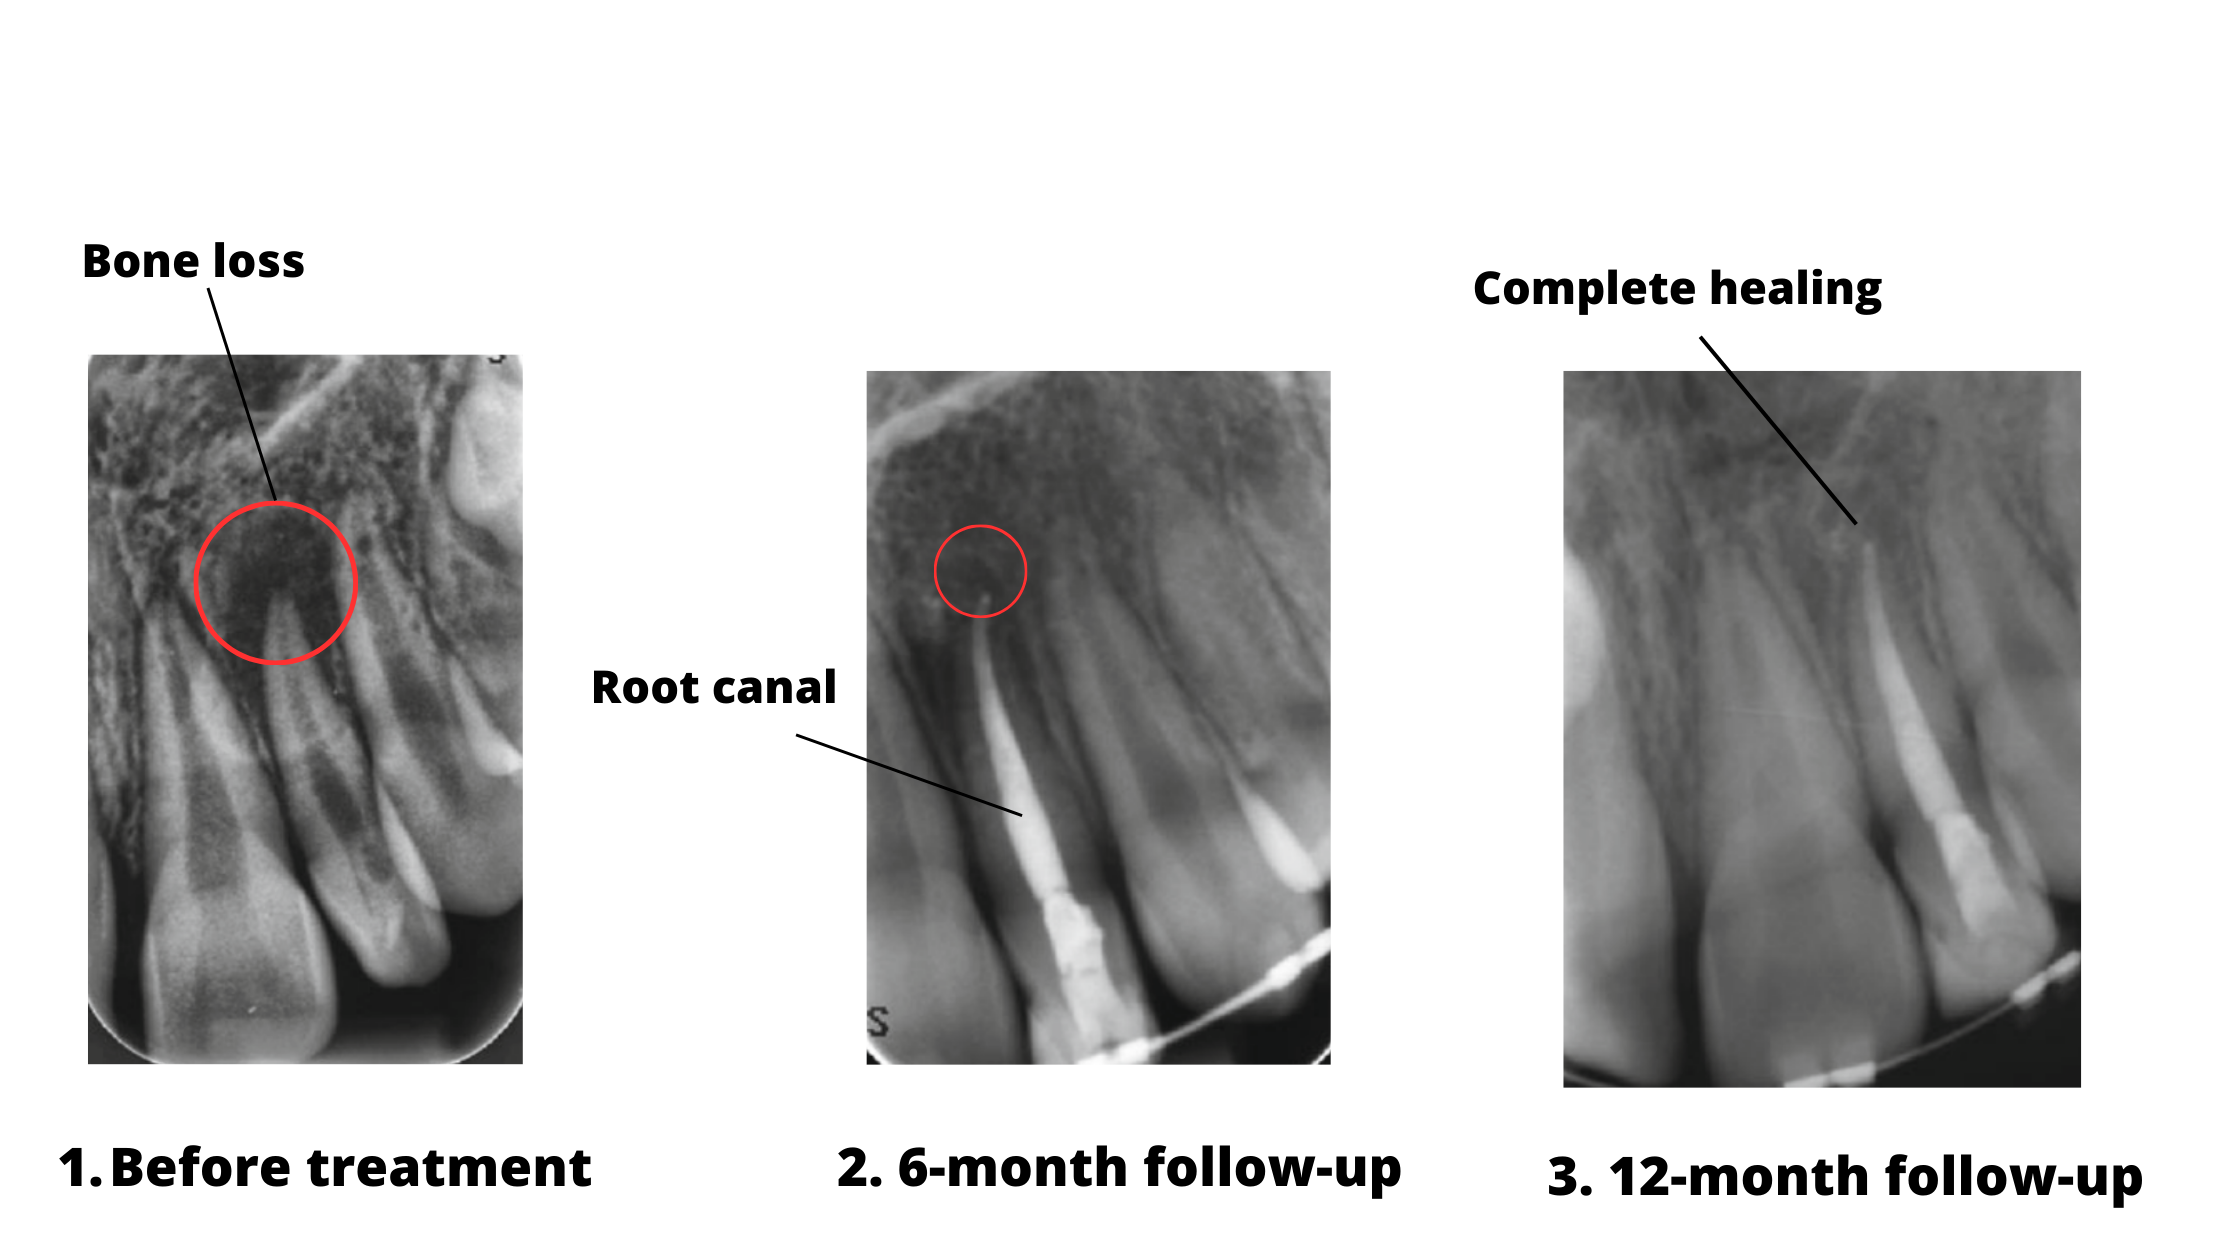 3 X-Rays showing the healing stages of a periapical abscess before treatment, 6-month follow-up and 12-month follow-up